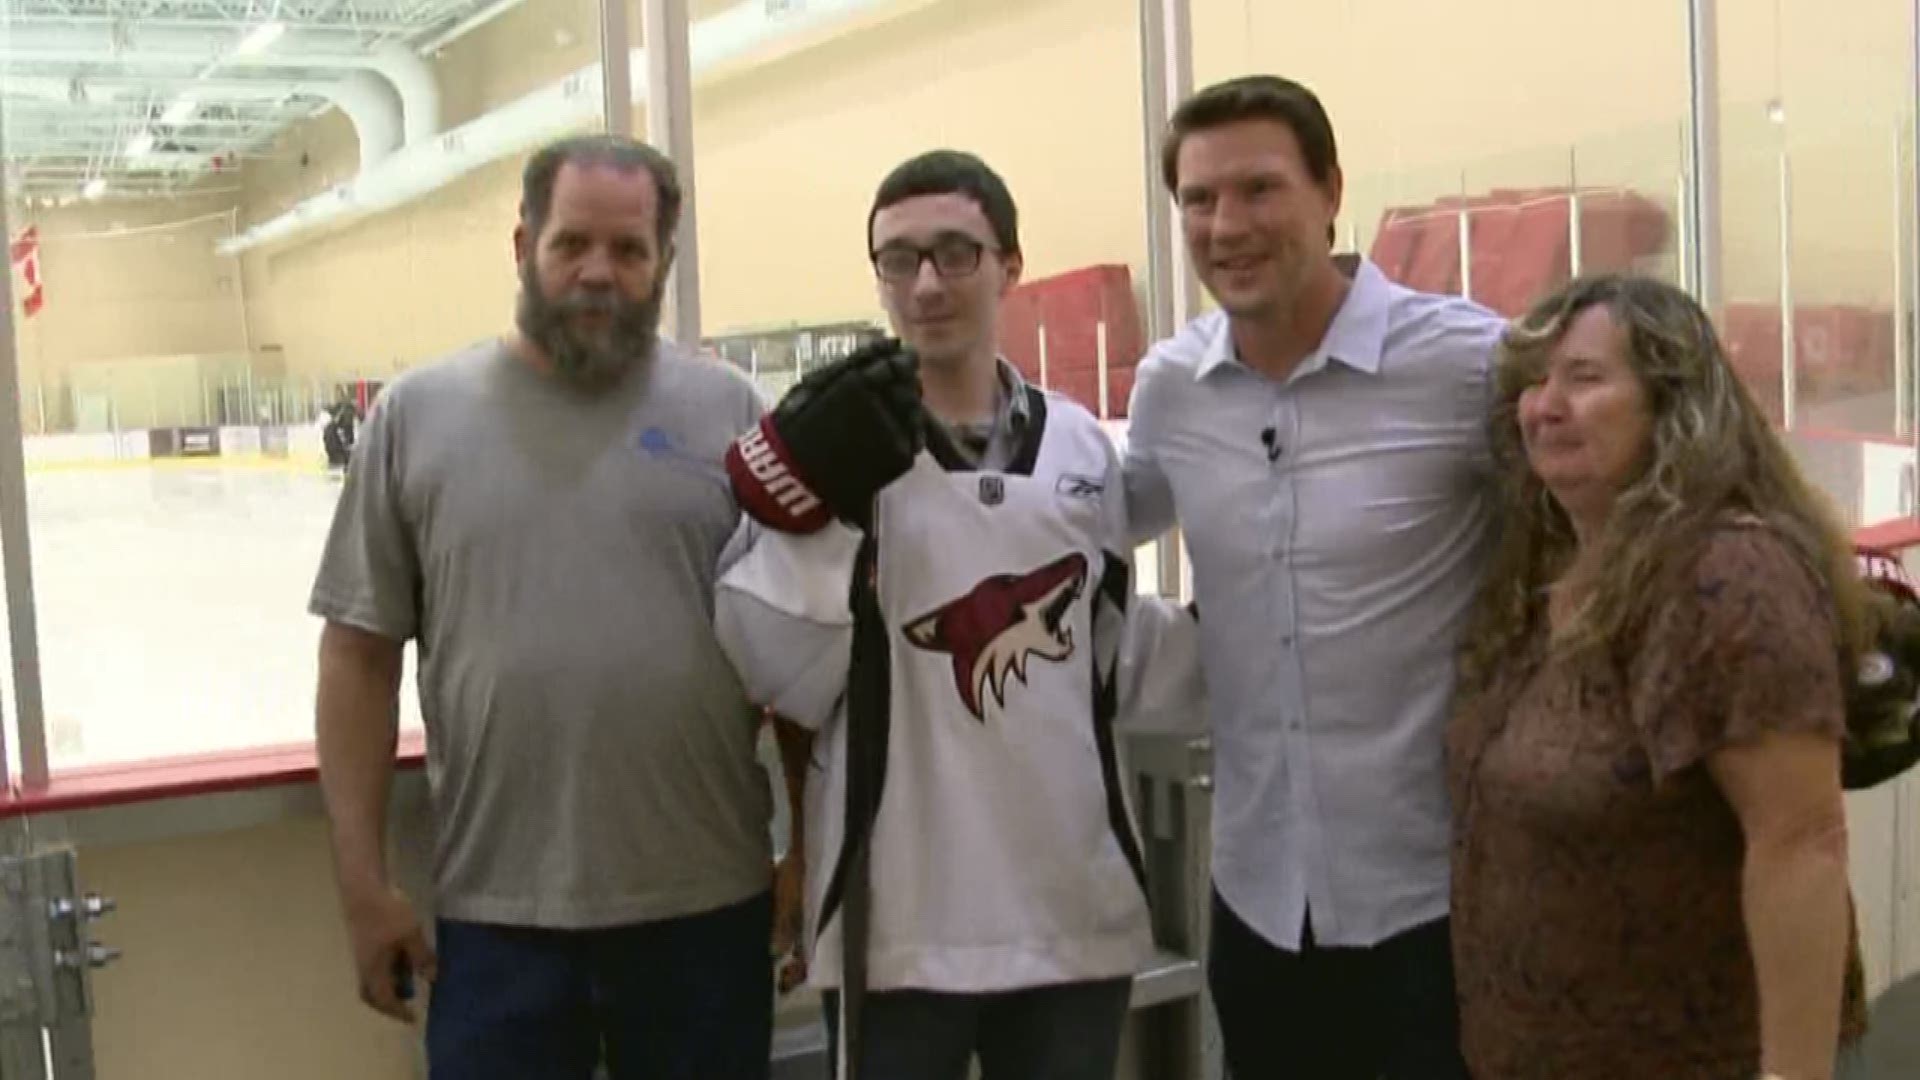 Arizona Coyotes great Shane Doan spends time with an awesome Arizona sports superfan.